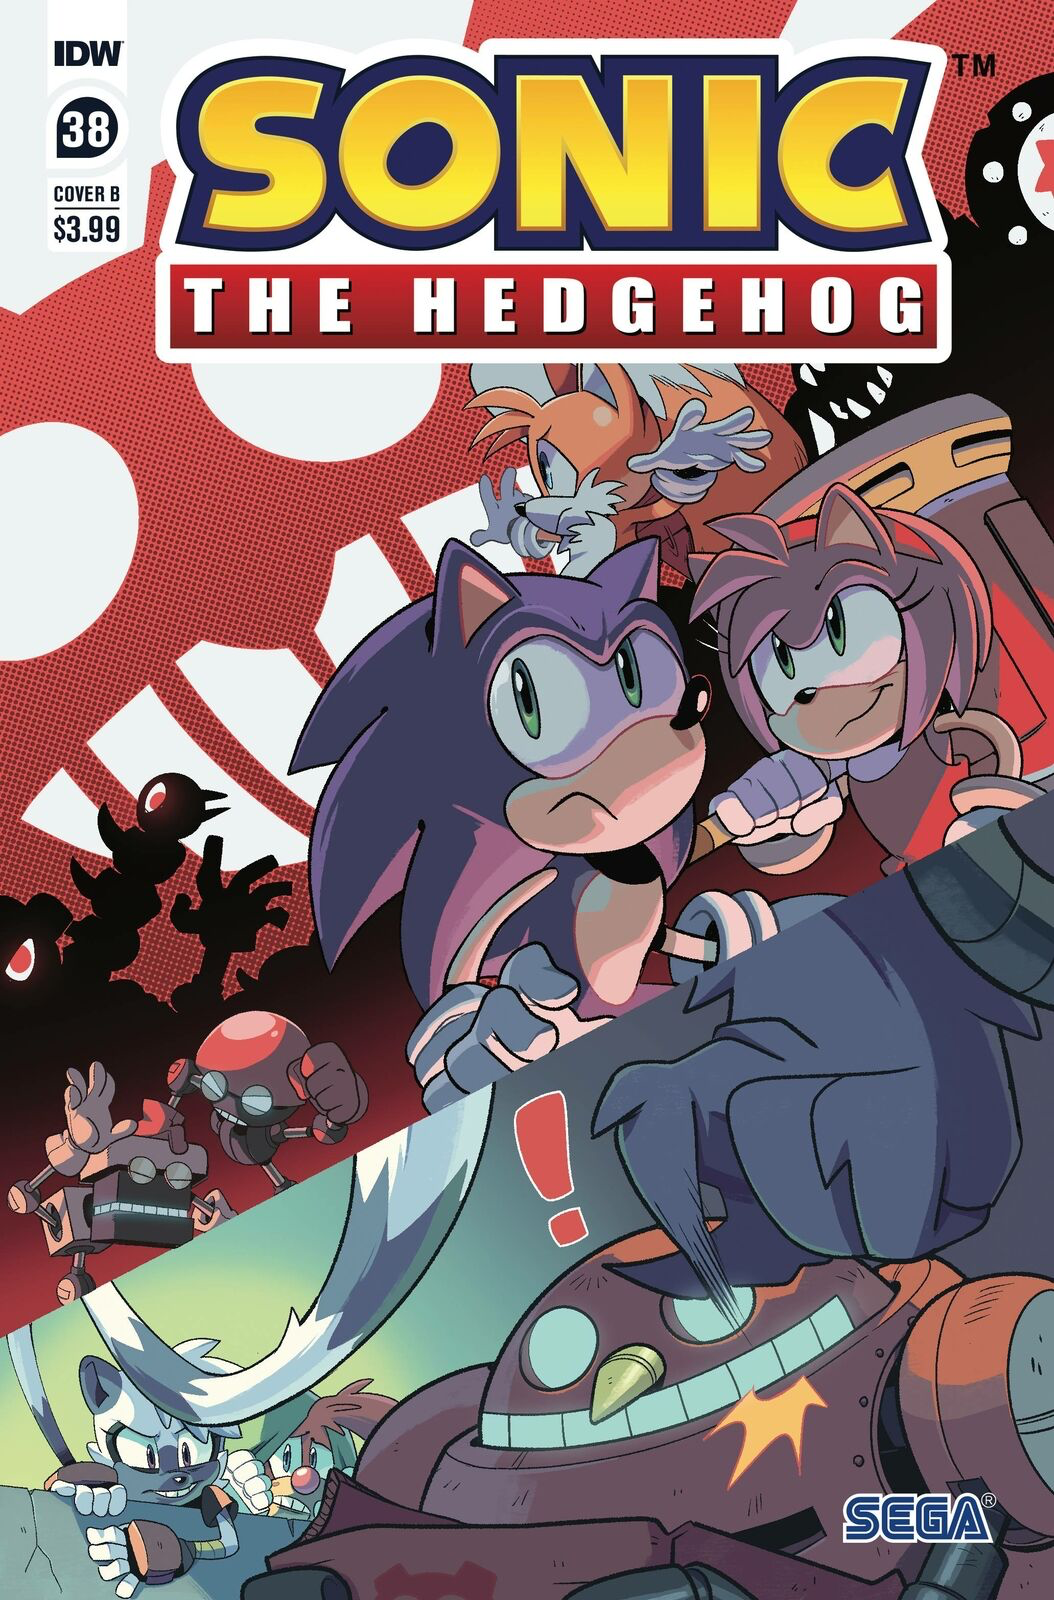 Sonic the Hedgehog: Amy's 30th Anniversary Special #1 - Comic Book